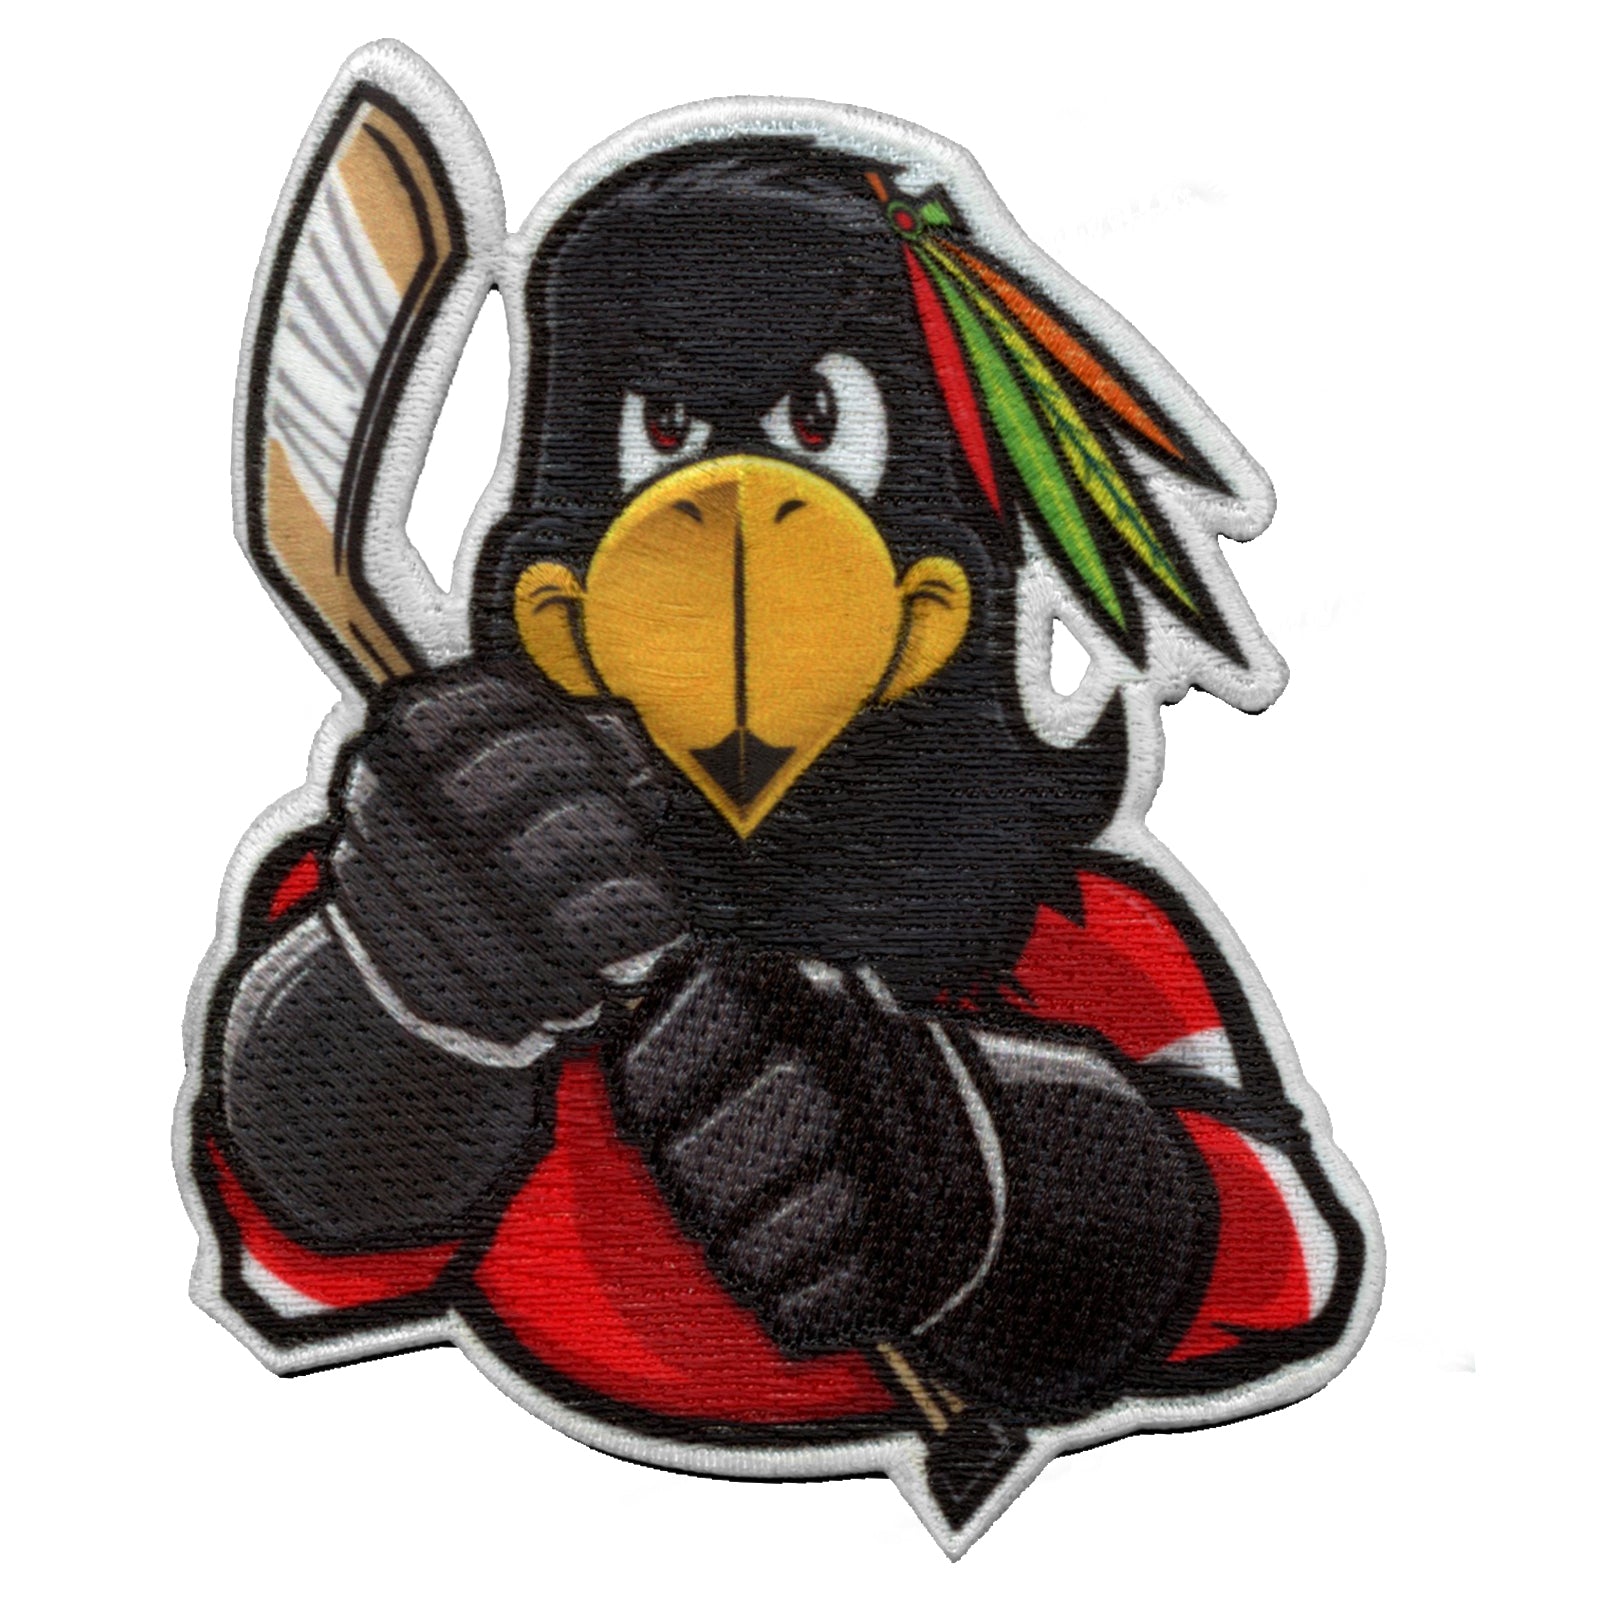 Chicago Illinois Hawk FotoPatch Mascot Hockey Parody Embroidered Iron On 